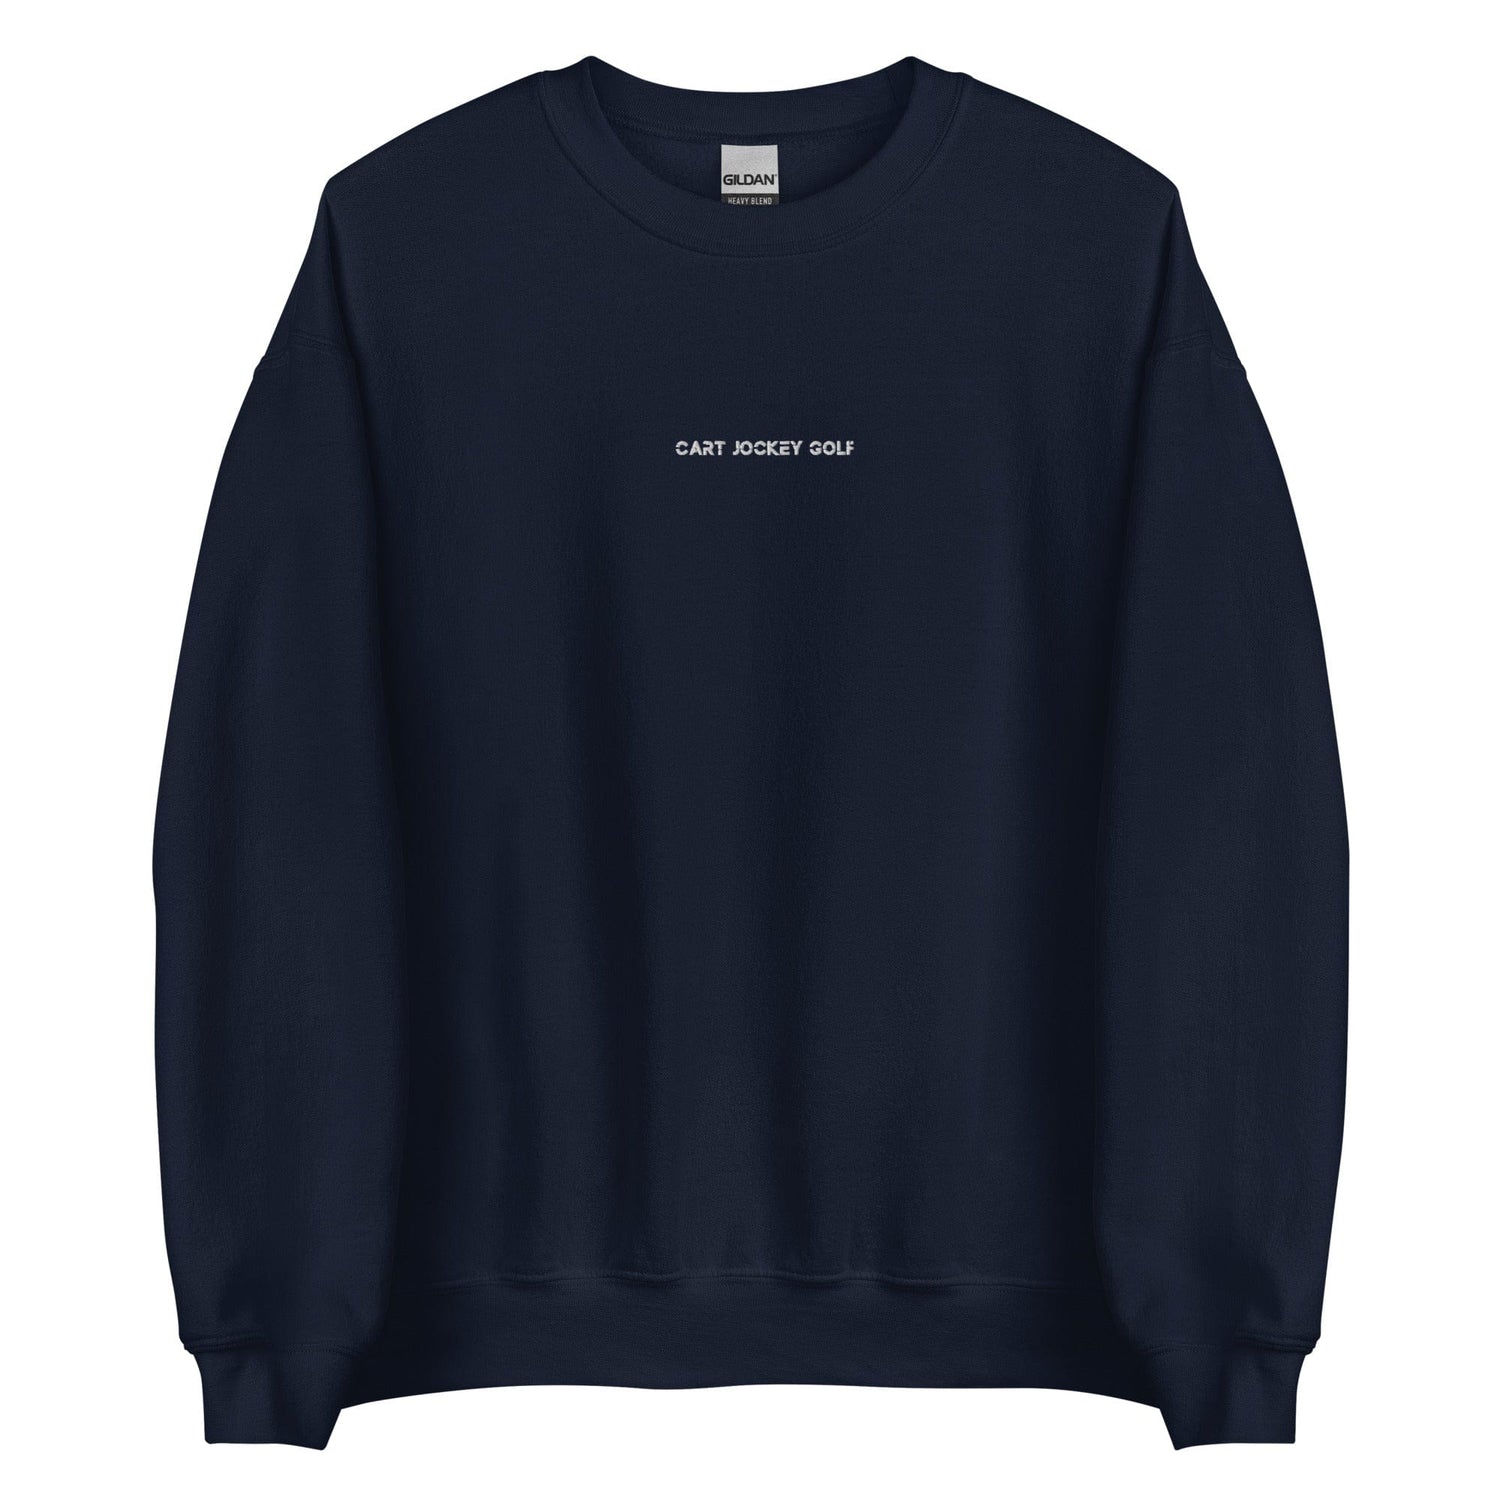 a navy Simple Embroidered Crewneck sweatshirt with the words 'you are not alone' on it, by Cart Jockey Golf.